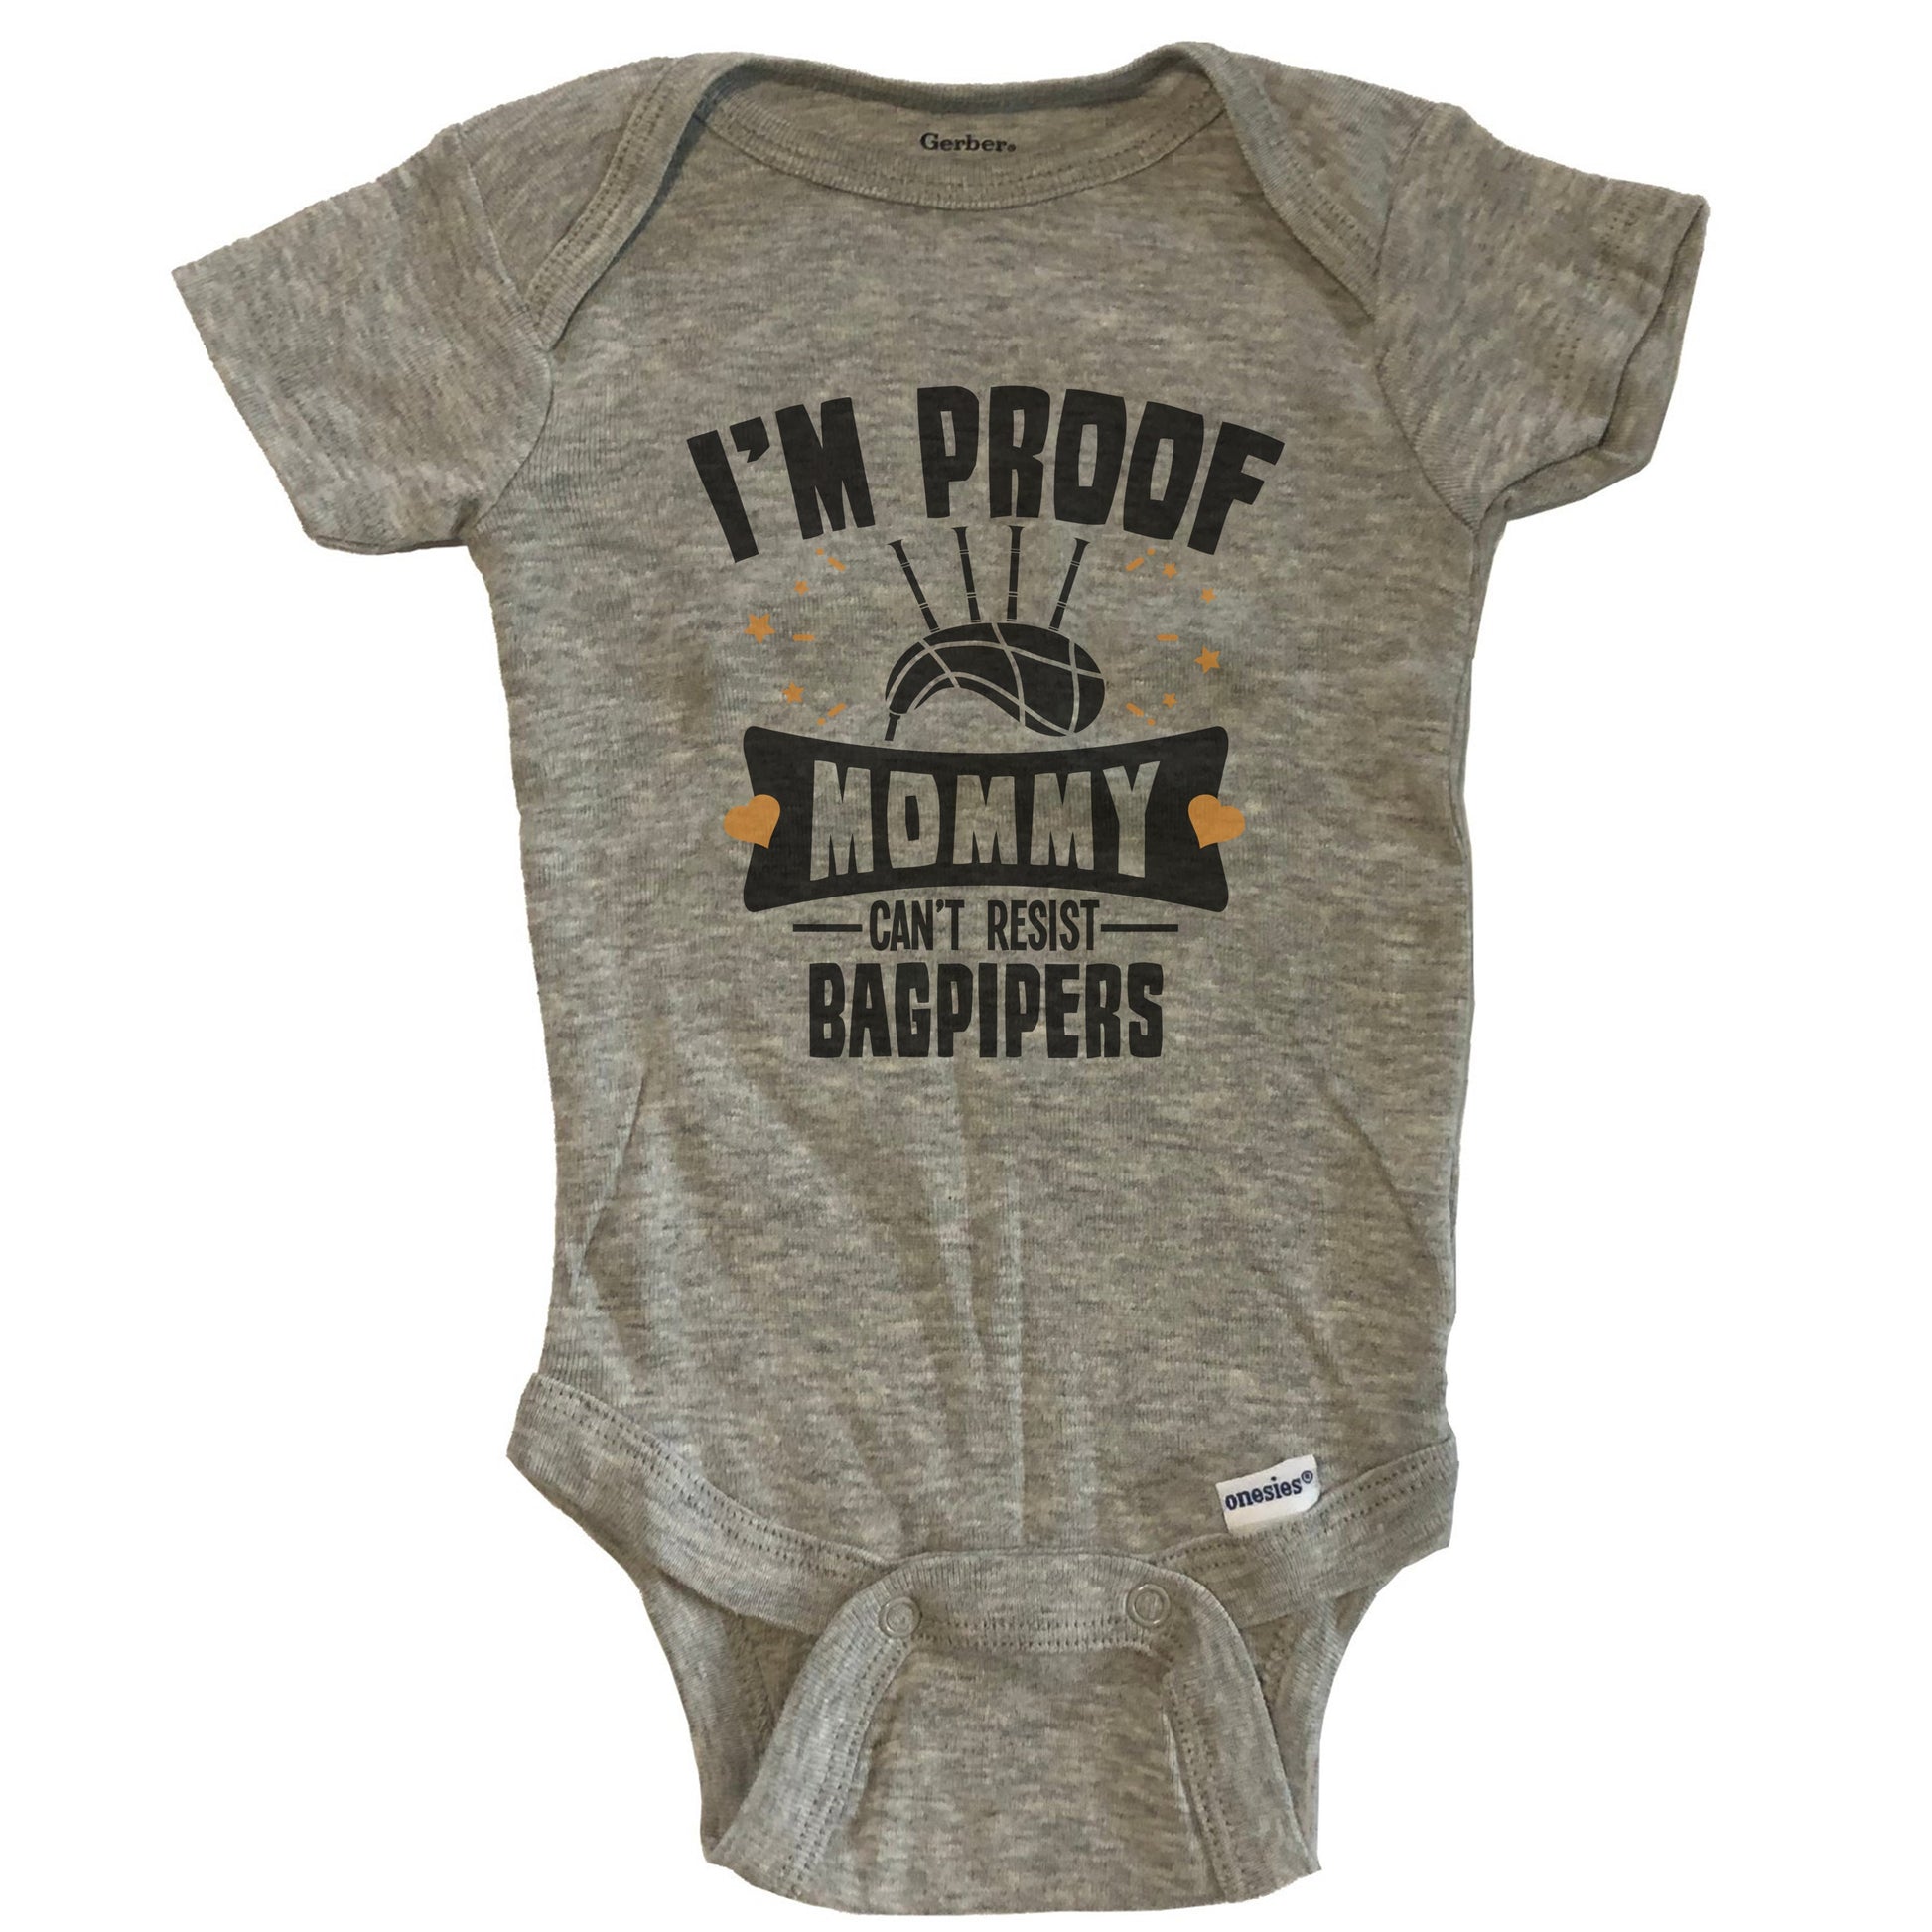 Funny Bagpipes Onesie - I'm Proof Mommy Can't Resist Bagpipers Baby Bodysuit